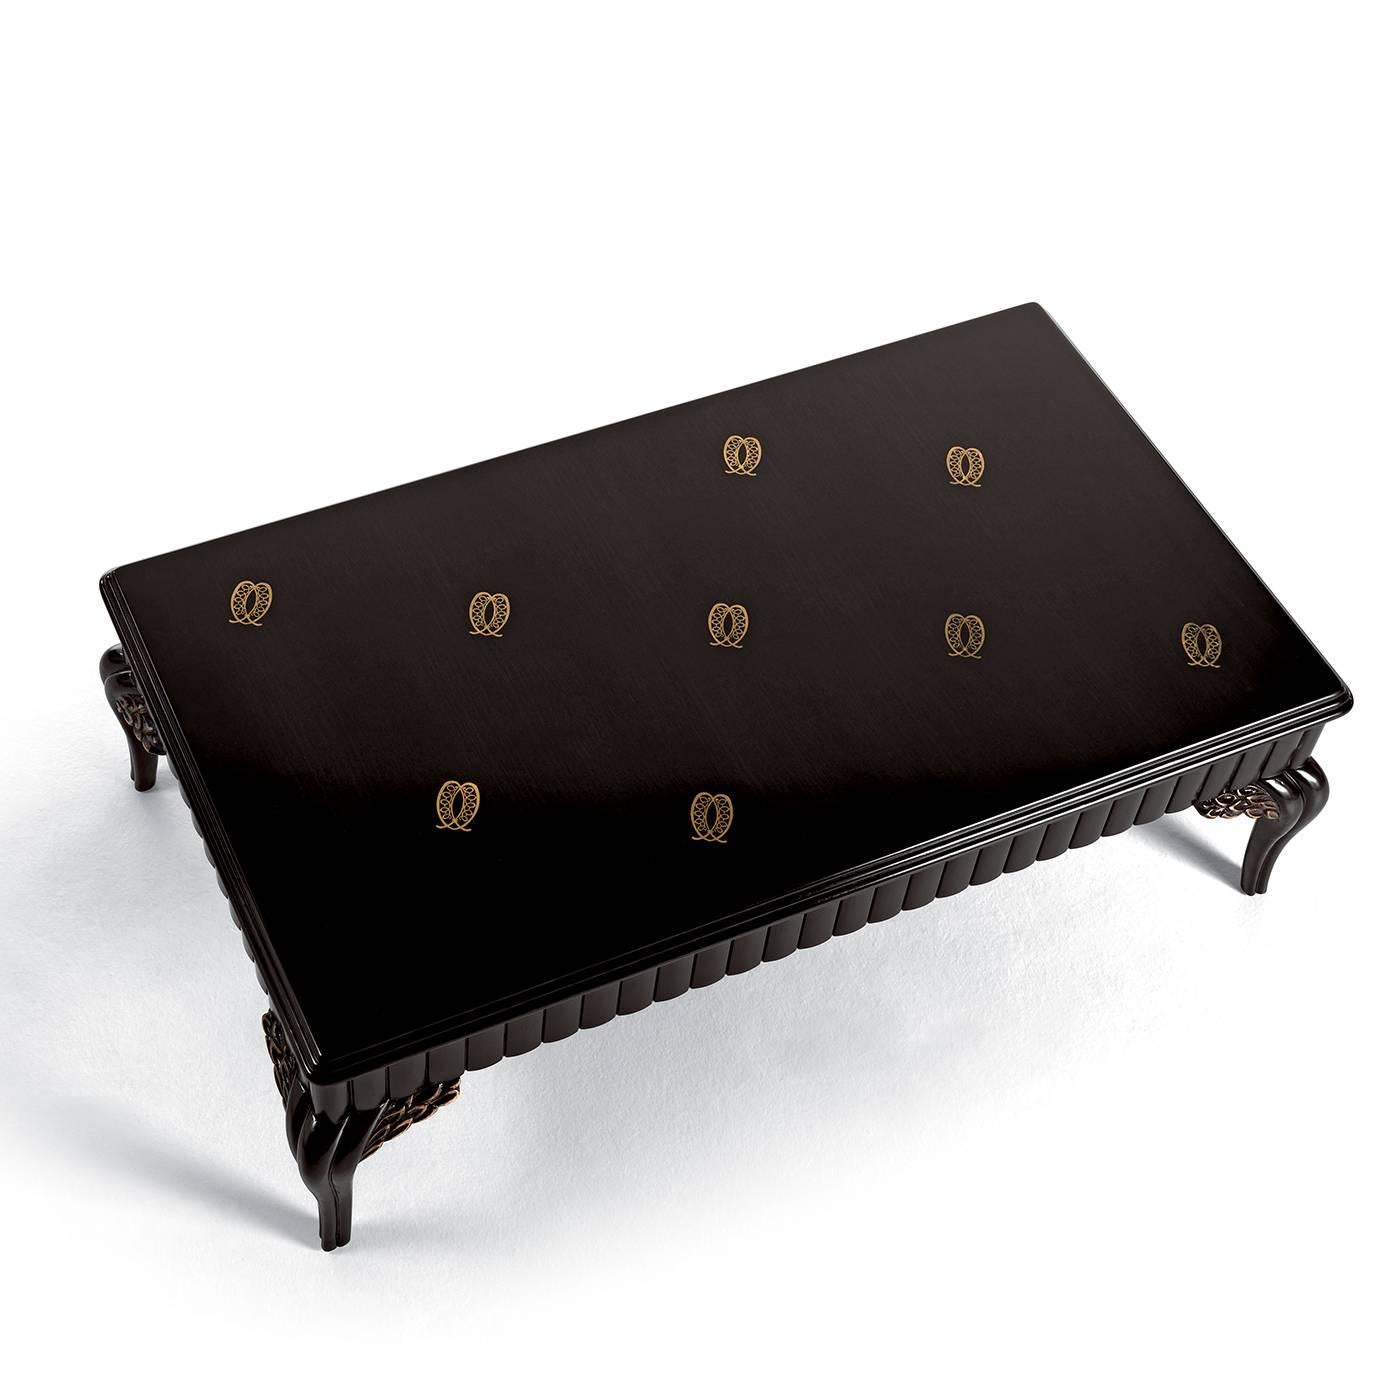 This exquisite coffee table will add a touch of luxurious elegance to a Classic living room, thanks to the noble materials used, the timeless design, and masterful craftsmanship. The entire structure features four curved legs and a rectangular top